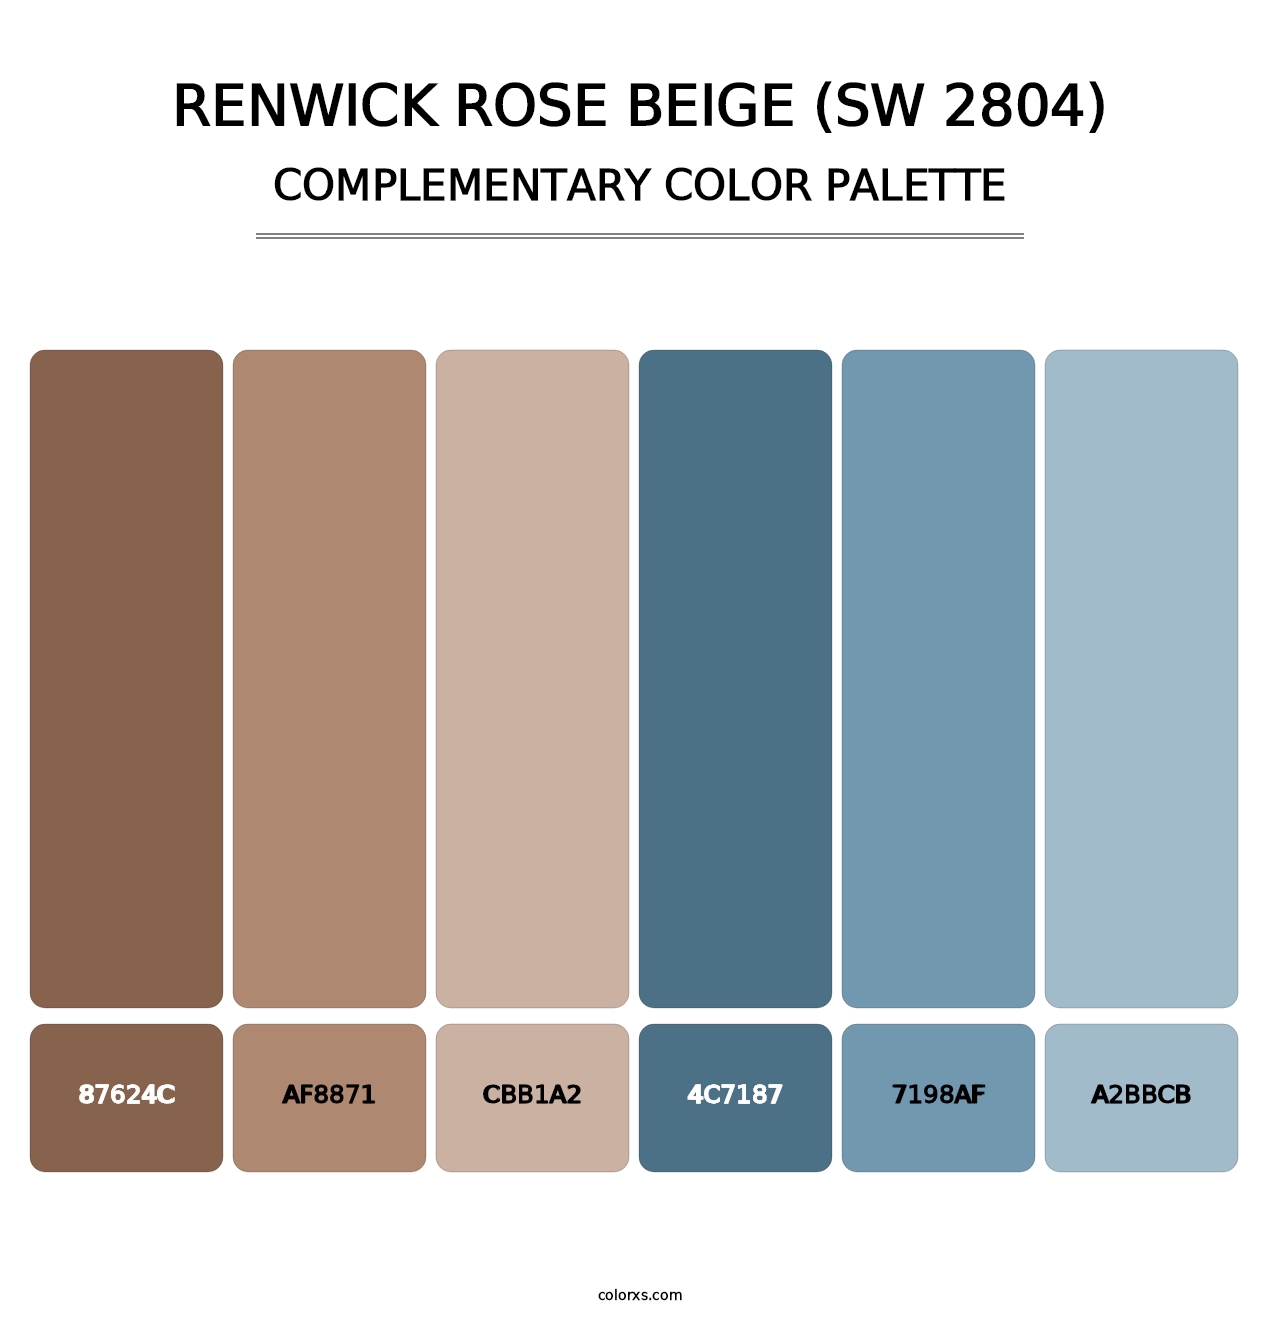 Renwick Rose Beige (SW 2804) - Complementary Color Palette